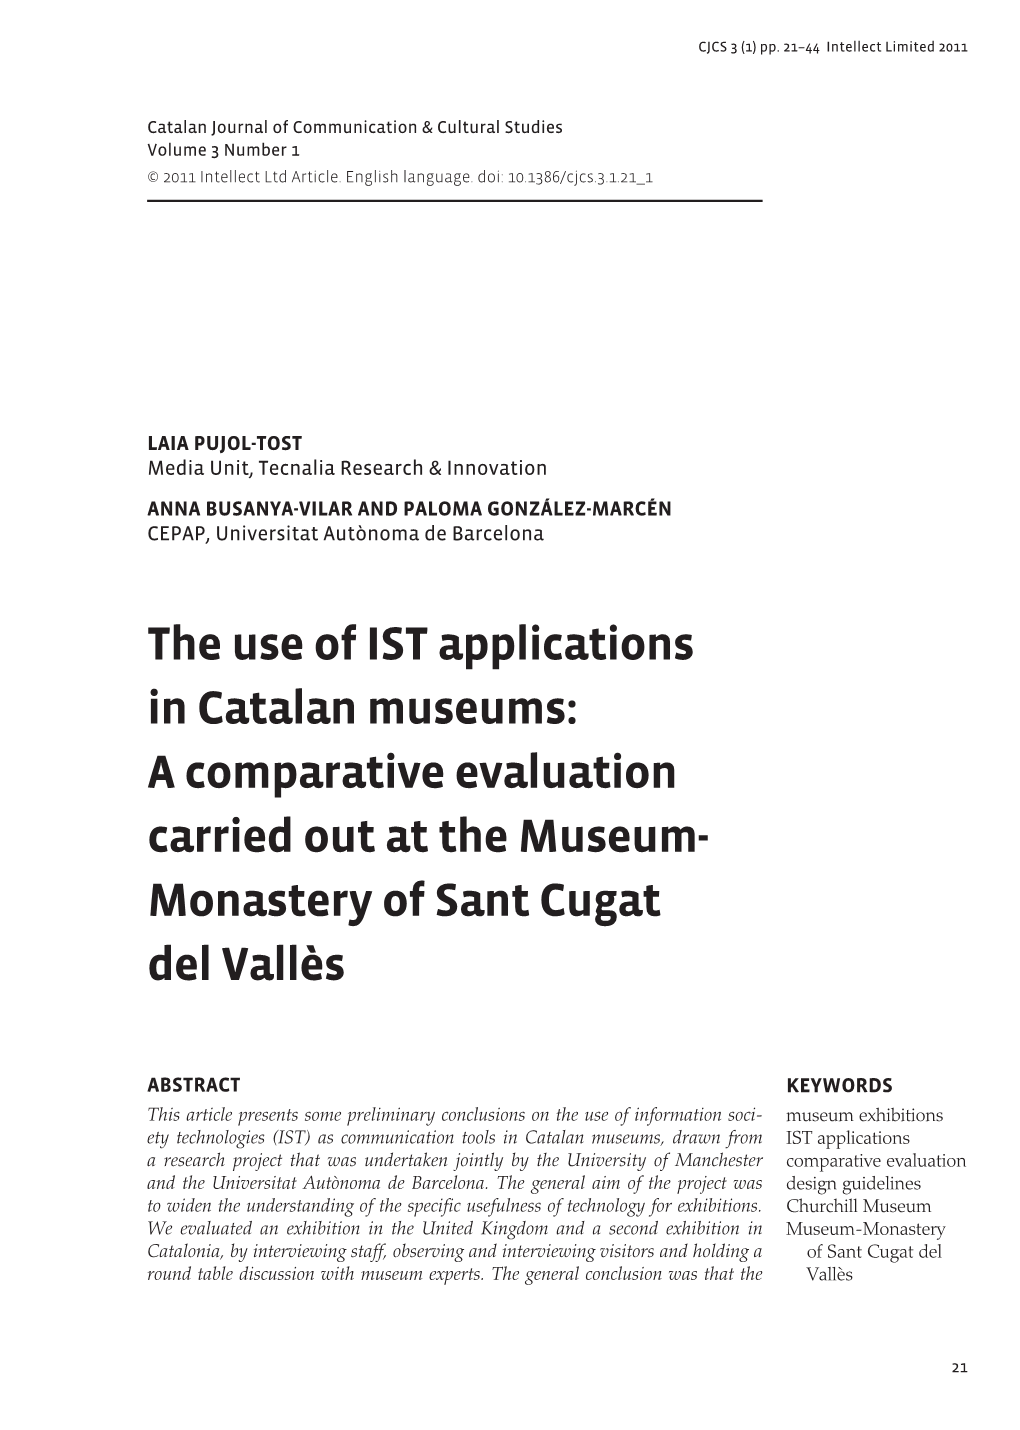 The Use of IST Applications in Catalan Museums: a Comparative Evaluation Carried out at the Museum- Monastery of Sant Cugat Del Vallès